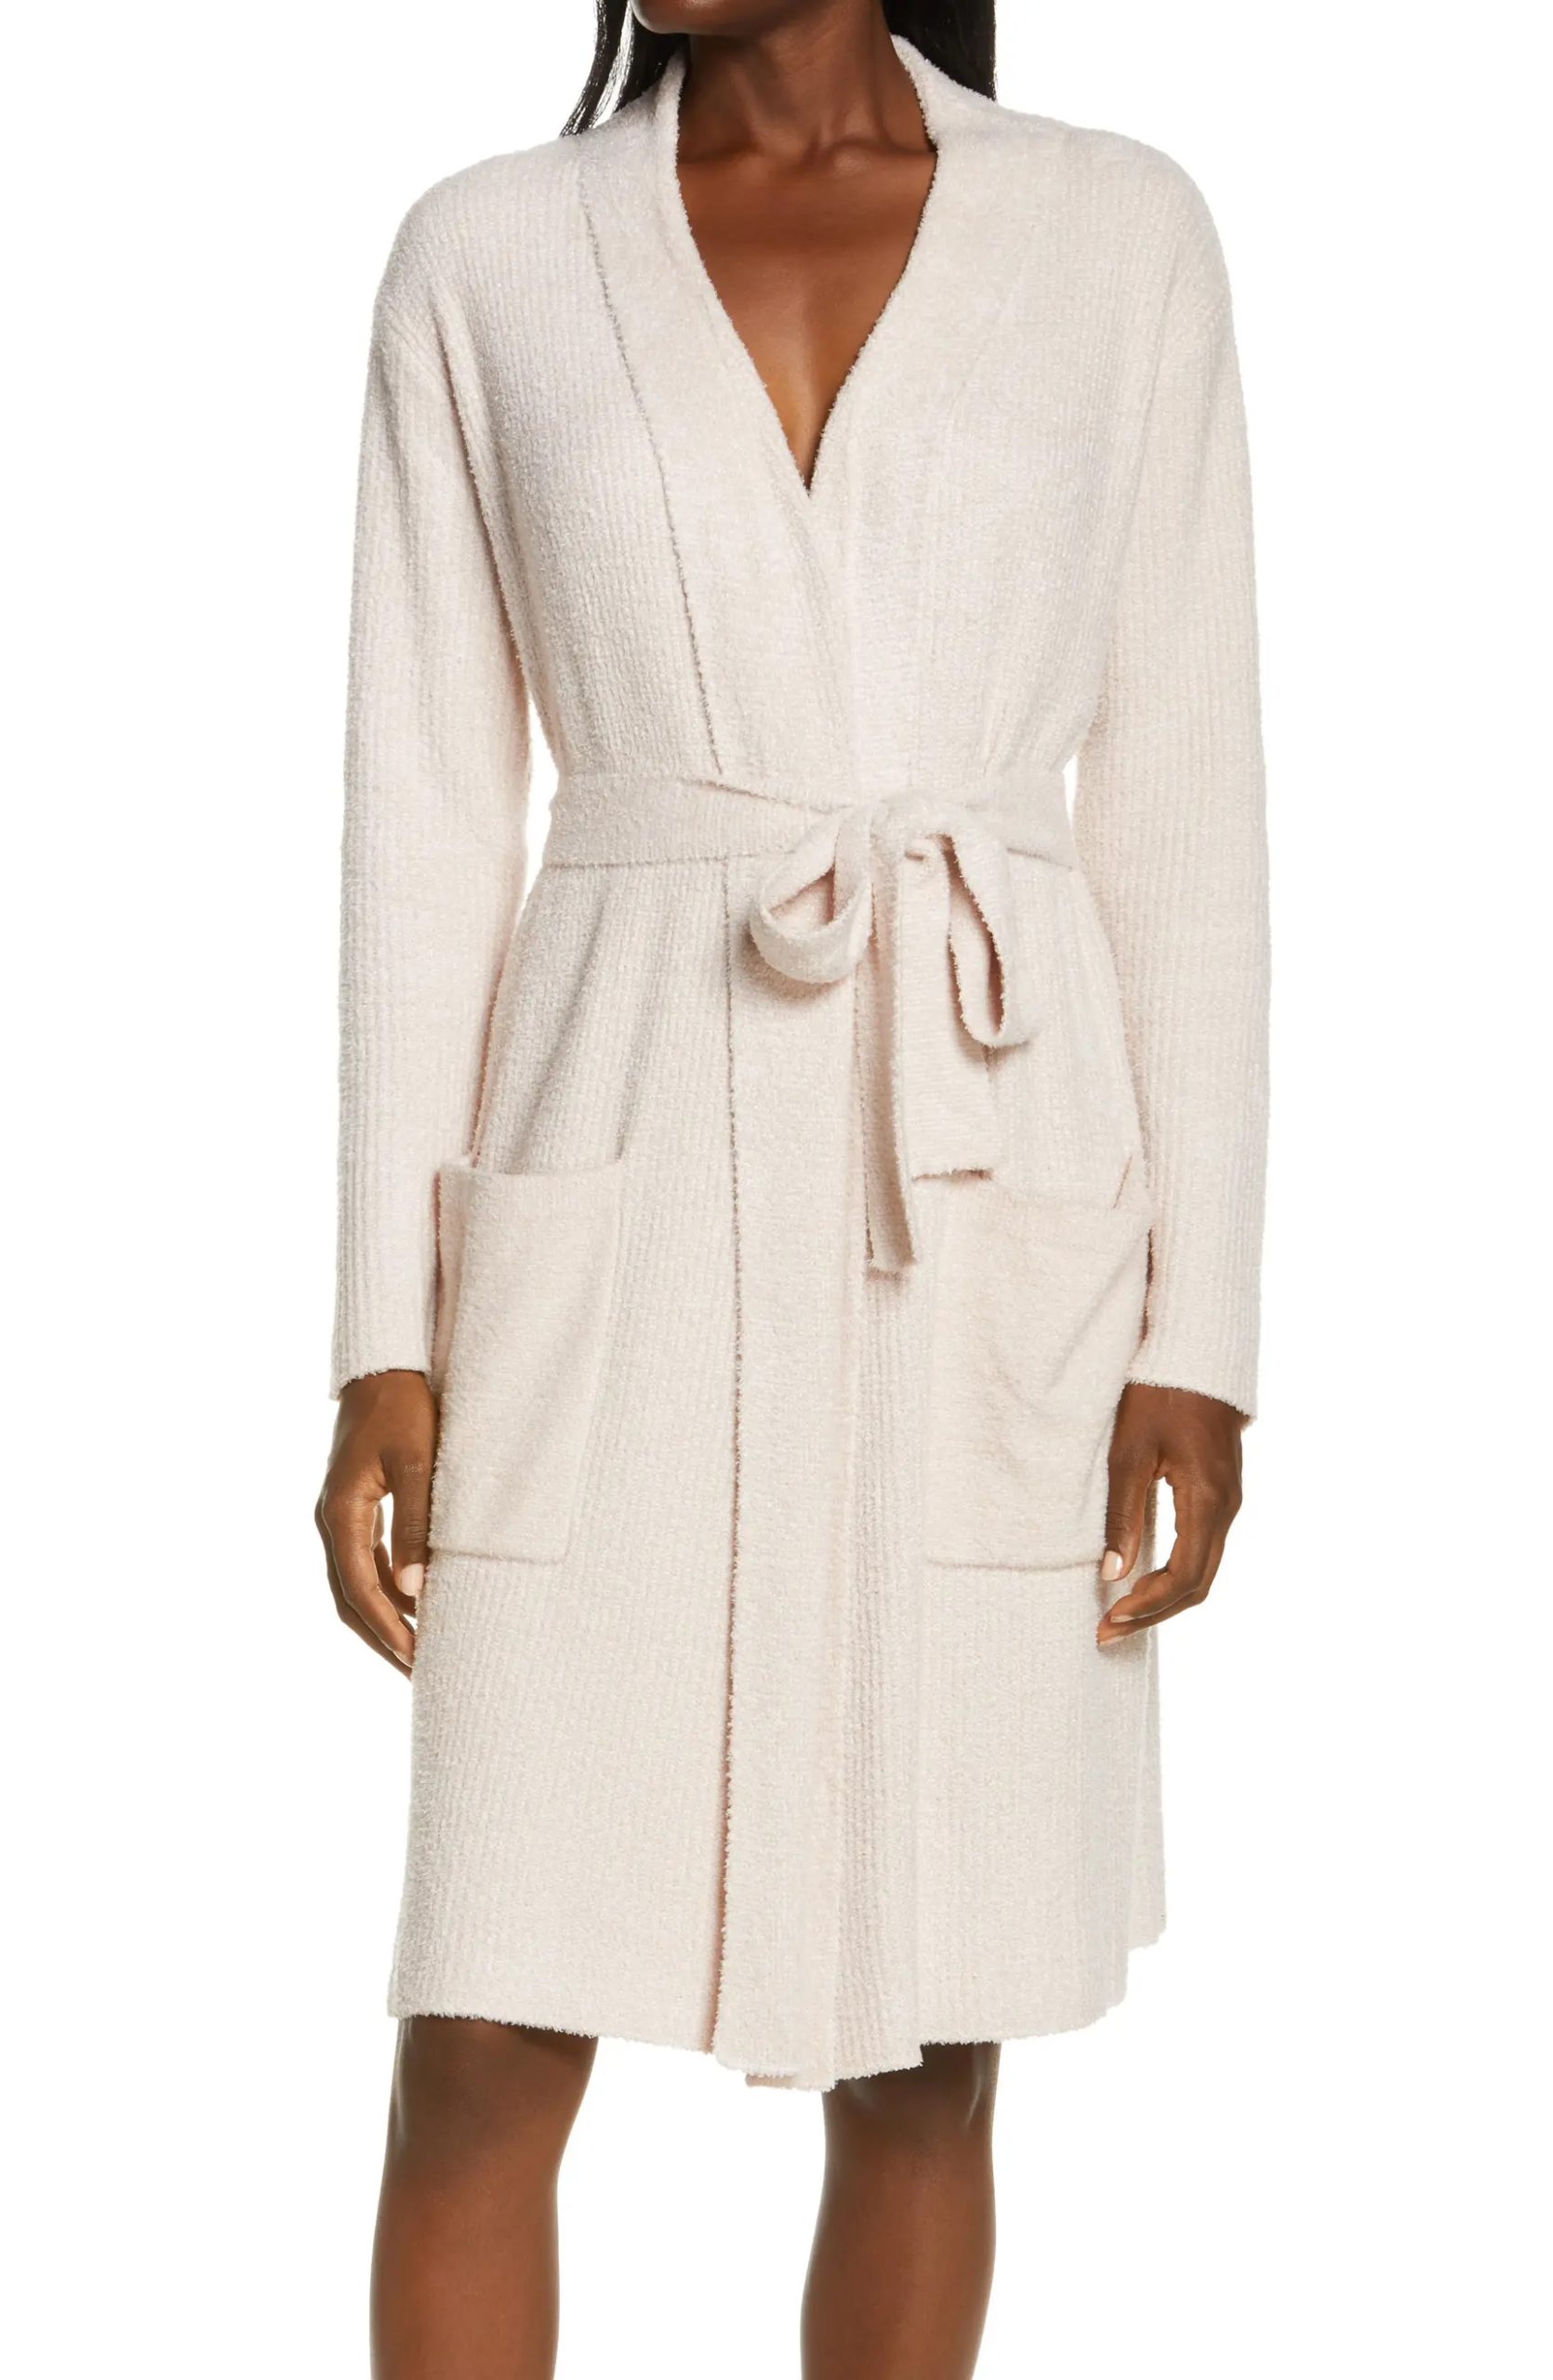 25 great deals in the Nordstrom Anniversary Sale: Barefoot Dreams robe